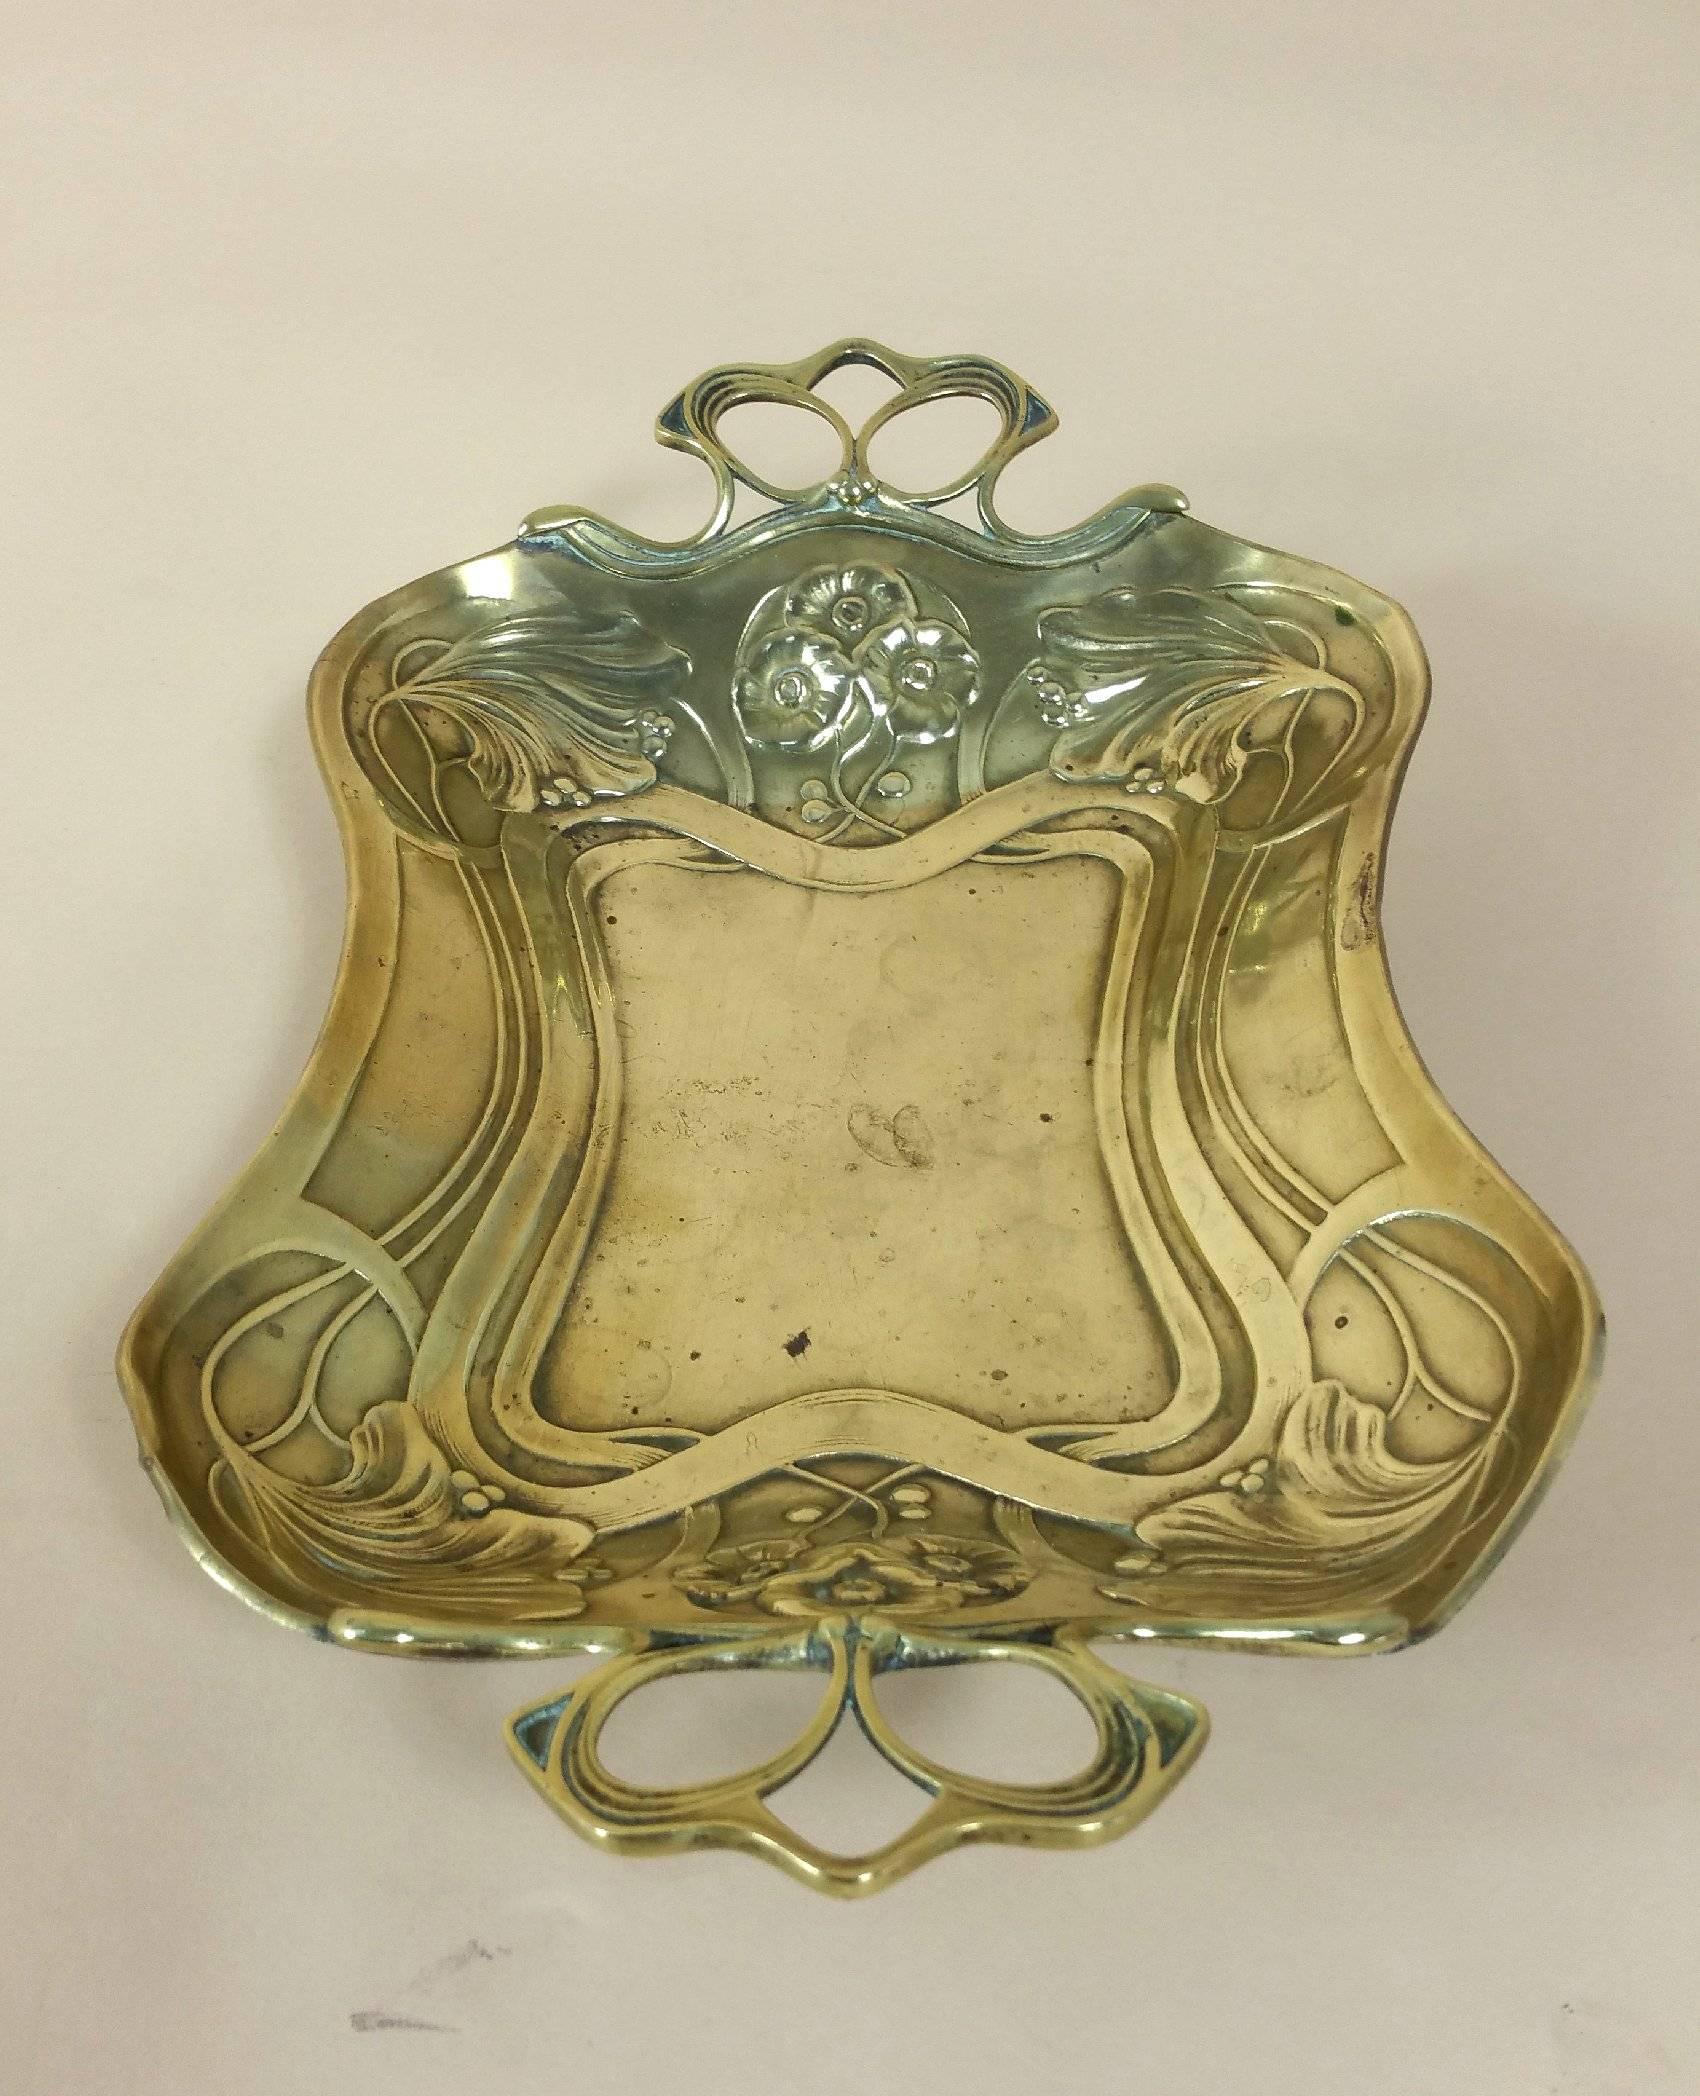 This highly decorative Art Nouveau twin handled brass dish is decorated with stylized flowers and stamped C.L.D. The top side of the dish is in very good condition and with the odd mark or blemish. The back has several more marks and worn areas, but